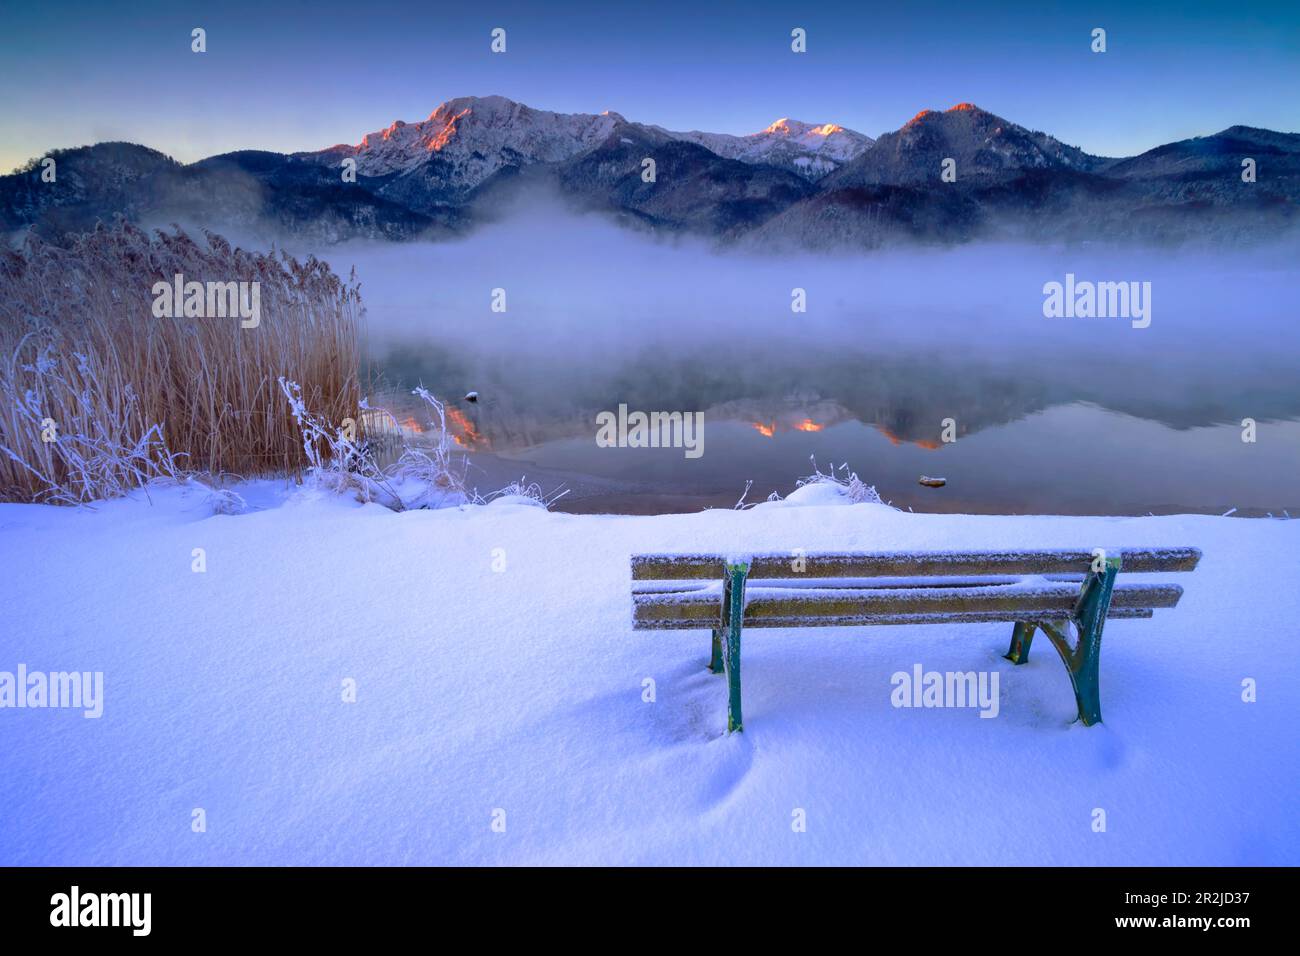 Ice-cold winter morning in Schlehdorf am Kochelsee. Stock Photo